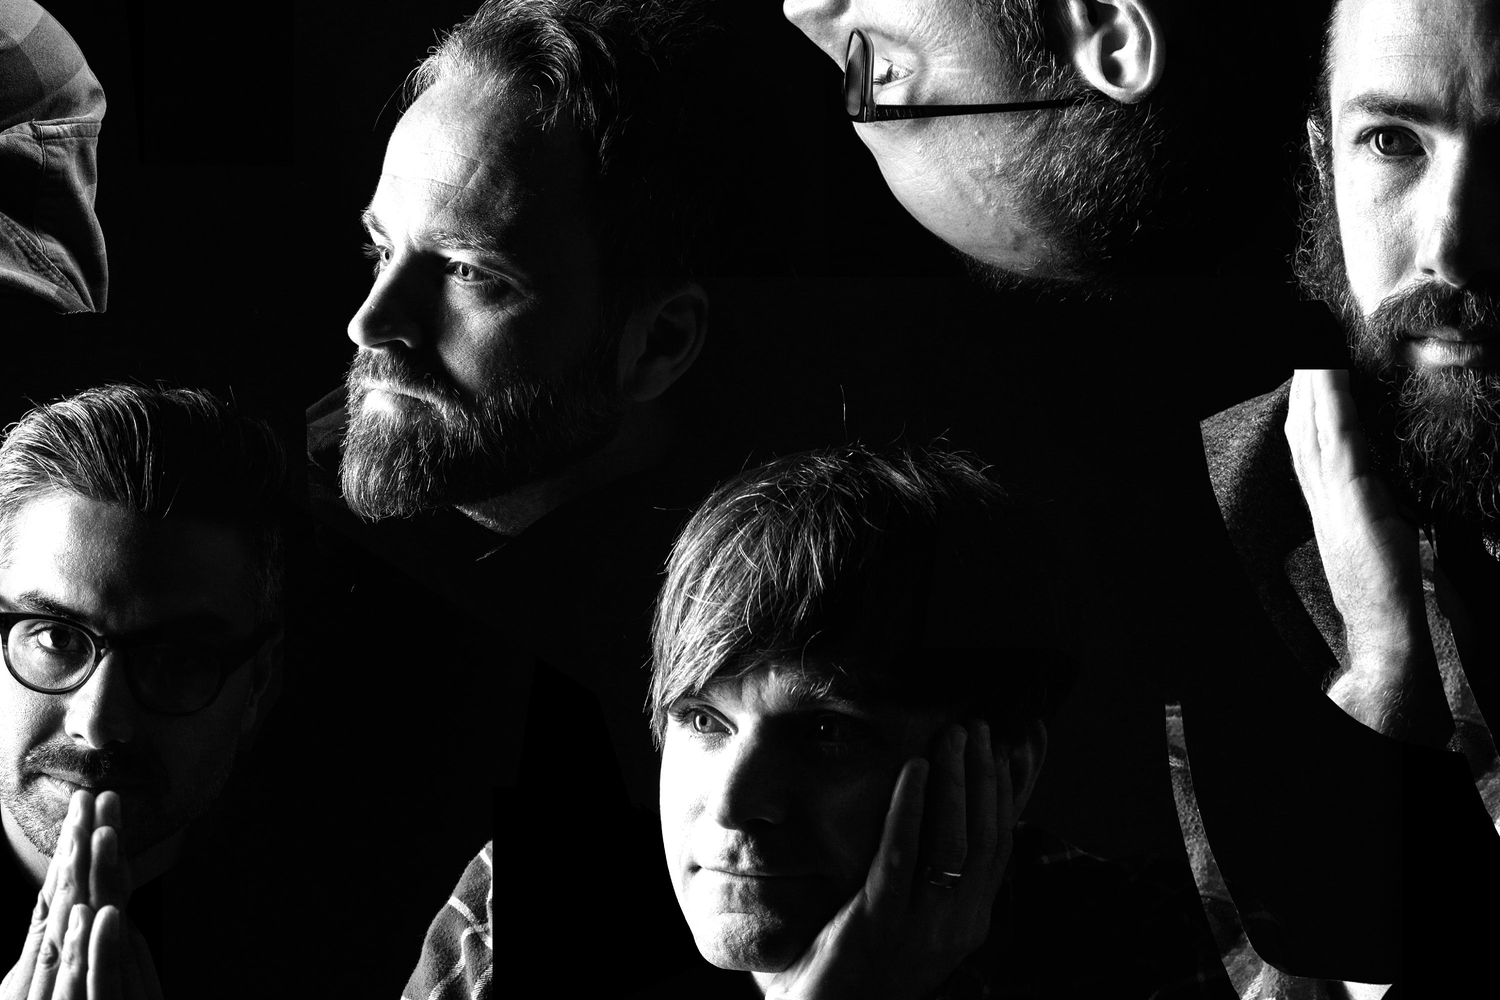 Listen to Death Cab For Cutie's new album 'Thank You For Today' in full